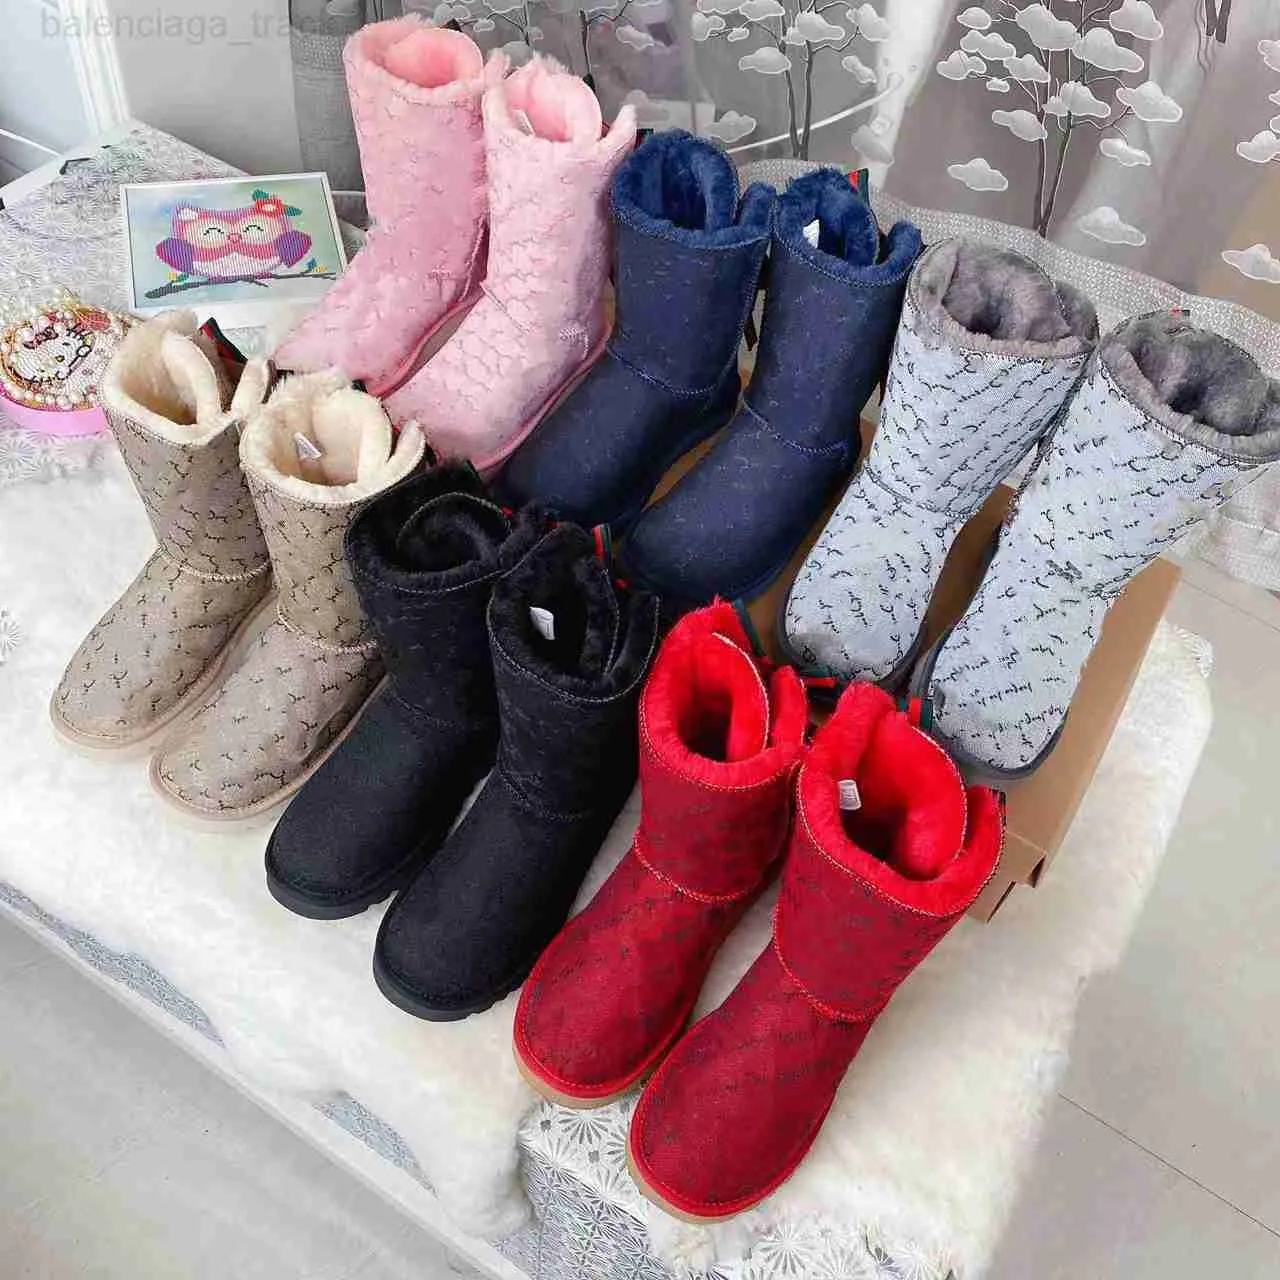 Australia Designer Boots Fur Shearling Suede Satin Tall Snow Boot Jauley Bow Booties Women Sneakers Wool Lined Fluff Winter Shoes Chestnut